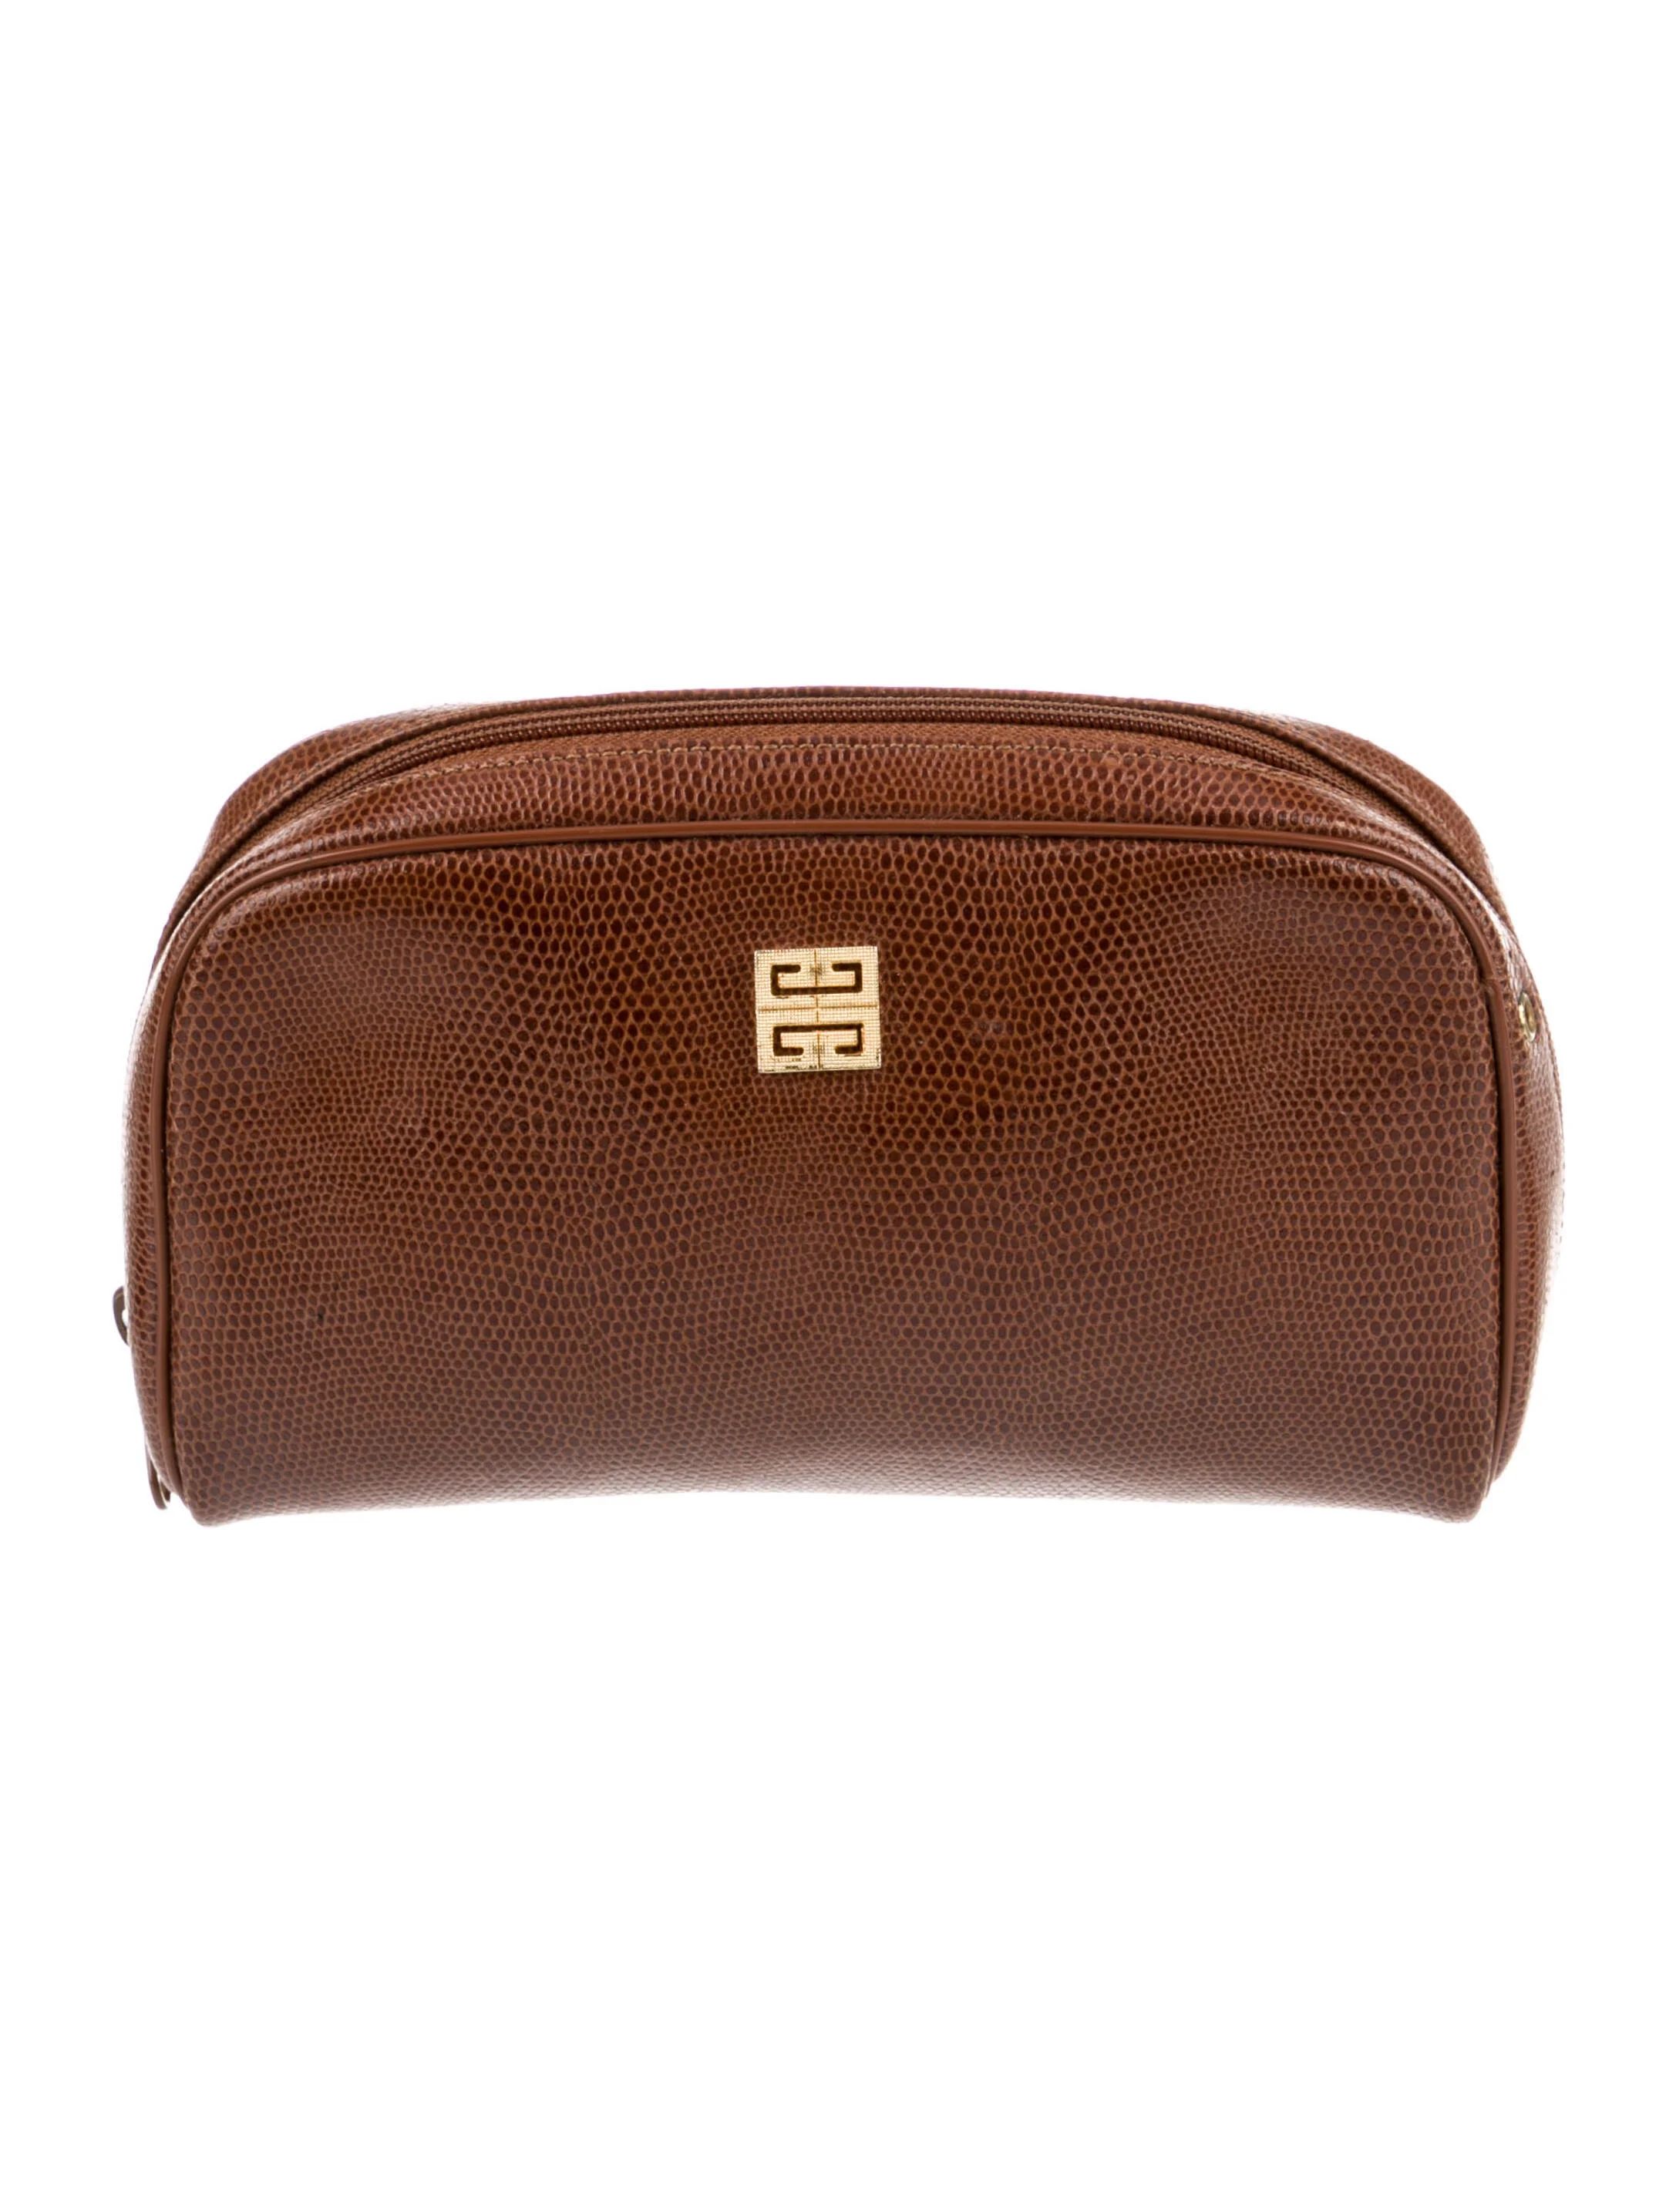 Embossed Leather Cosmetic Bag | The RealReal